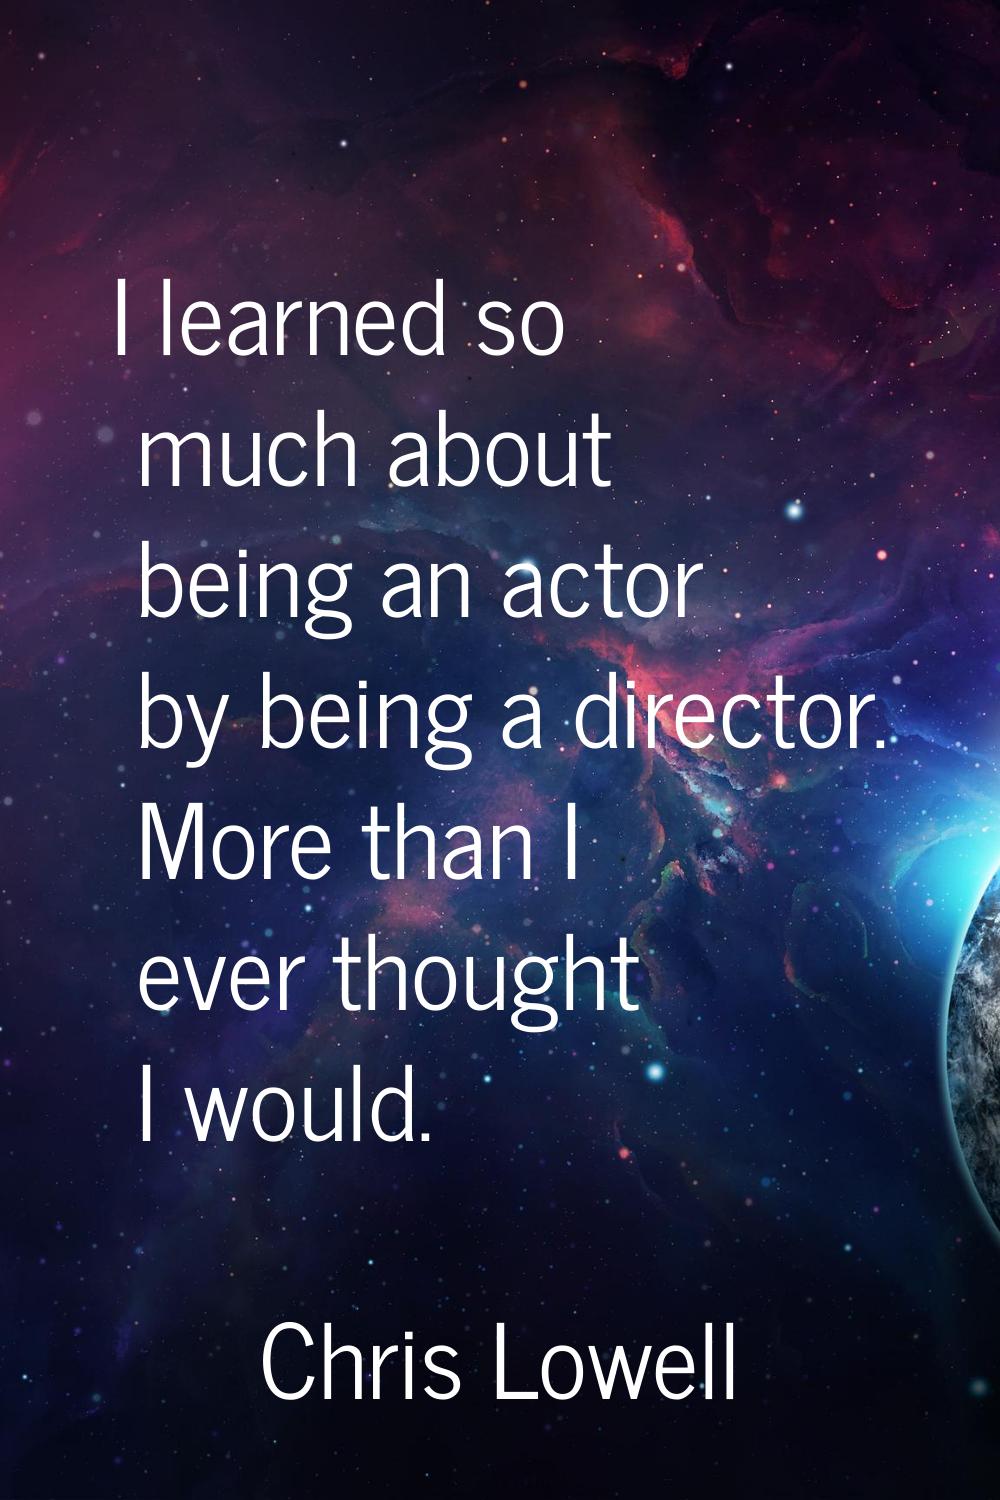 I learned so much about being an actor by being a director. More than I ever thought I would.